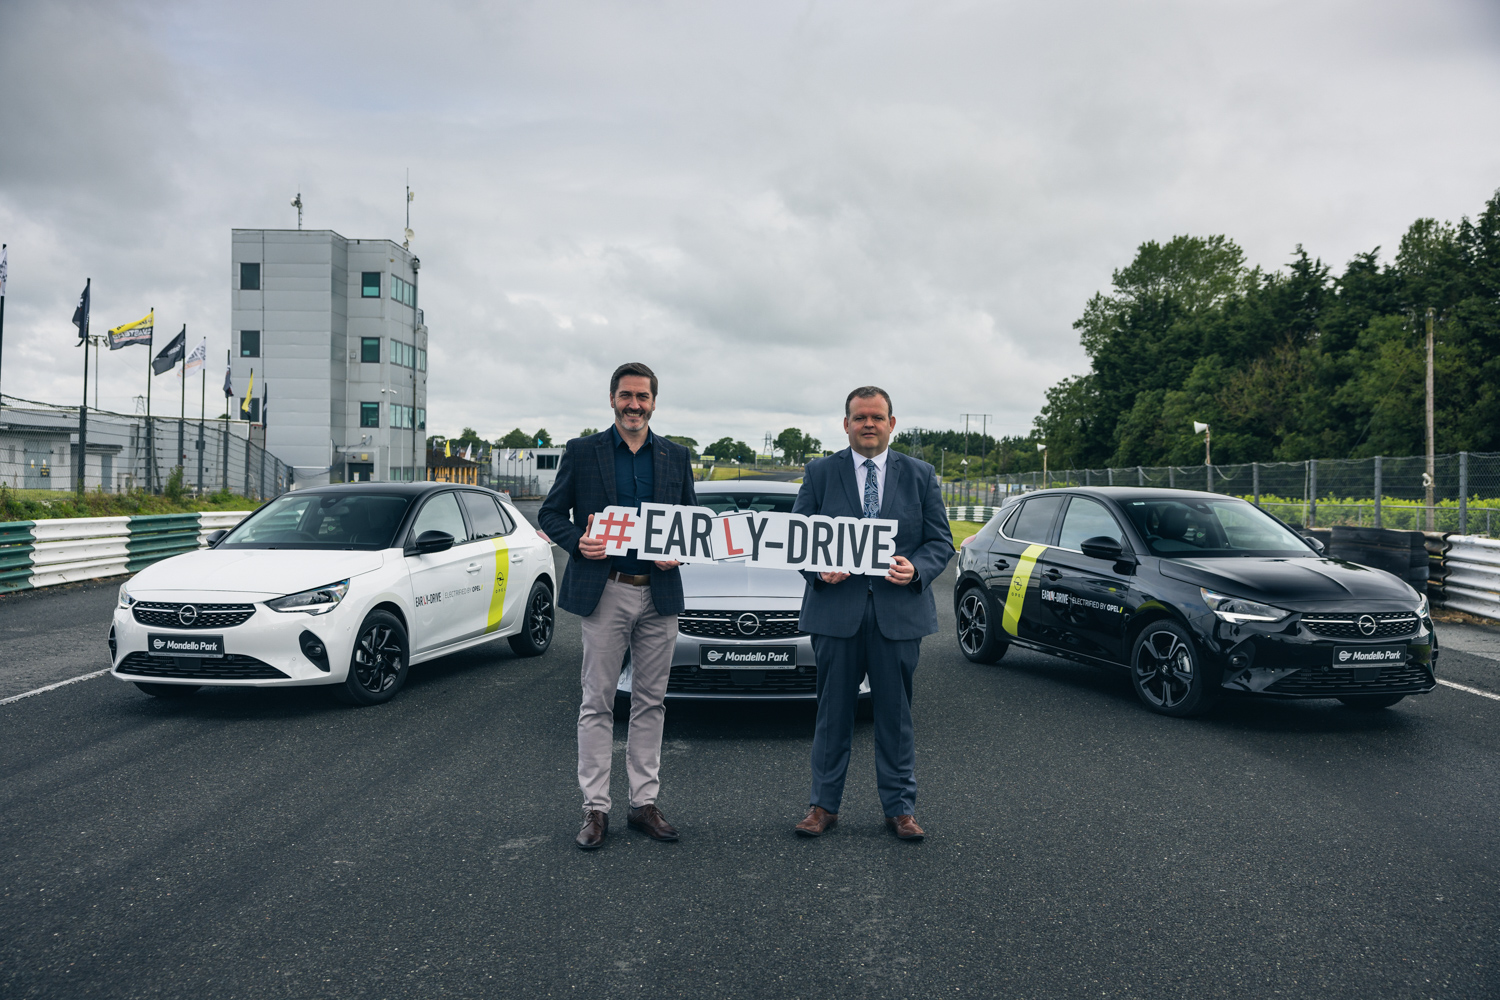 Car News | Opel partners with Mondello for Early-Drive initiative | CompleteCar.ie